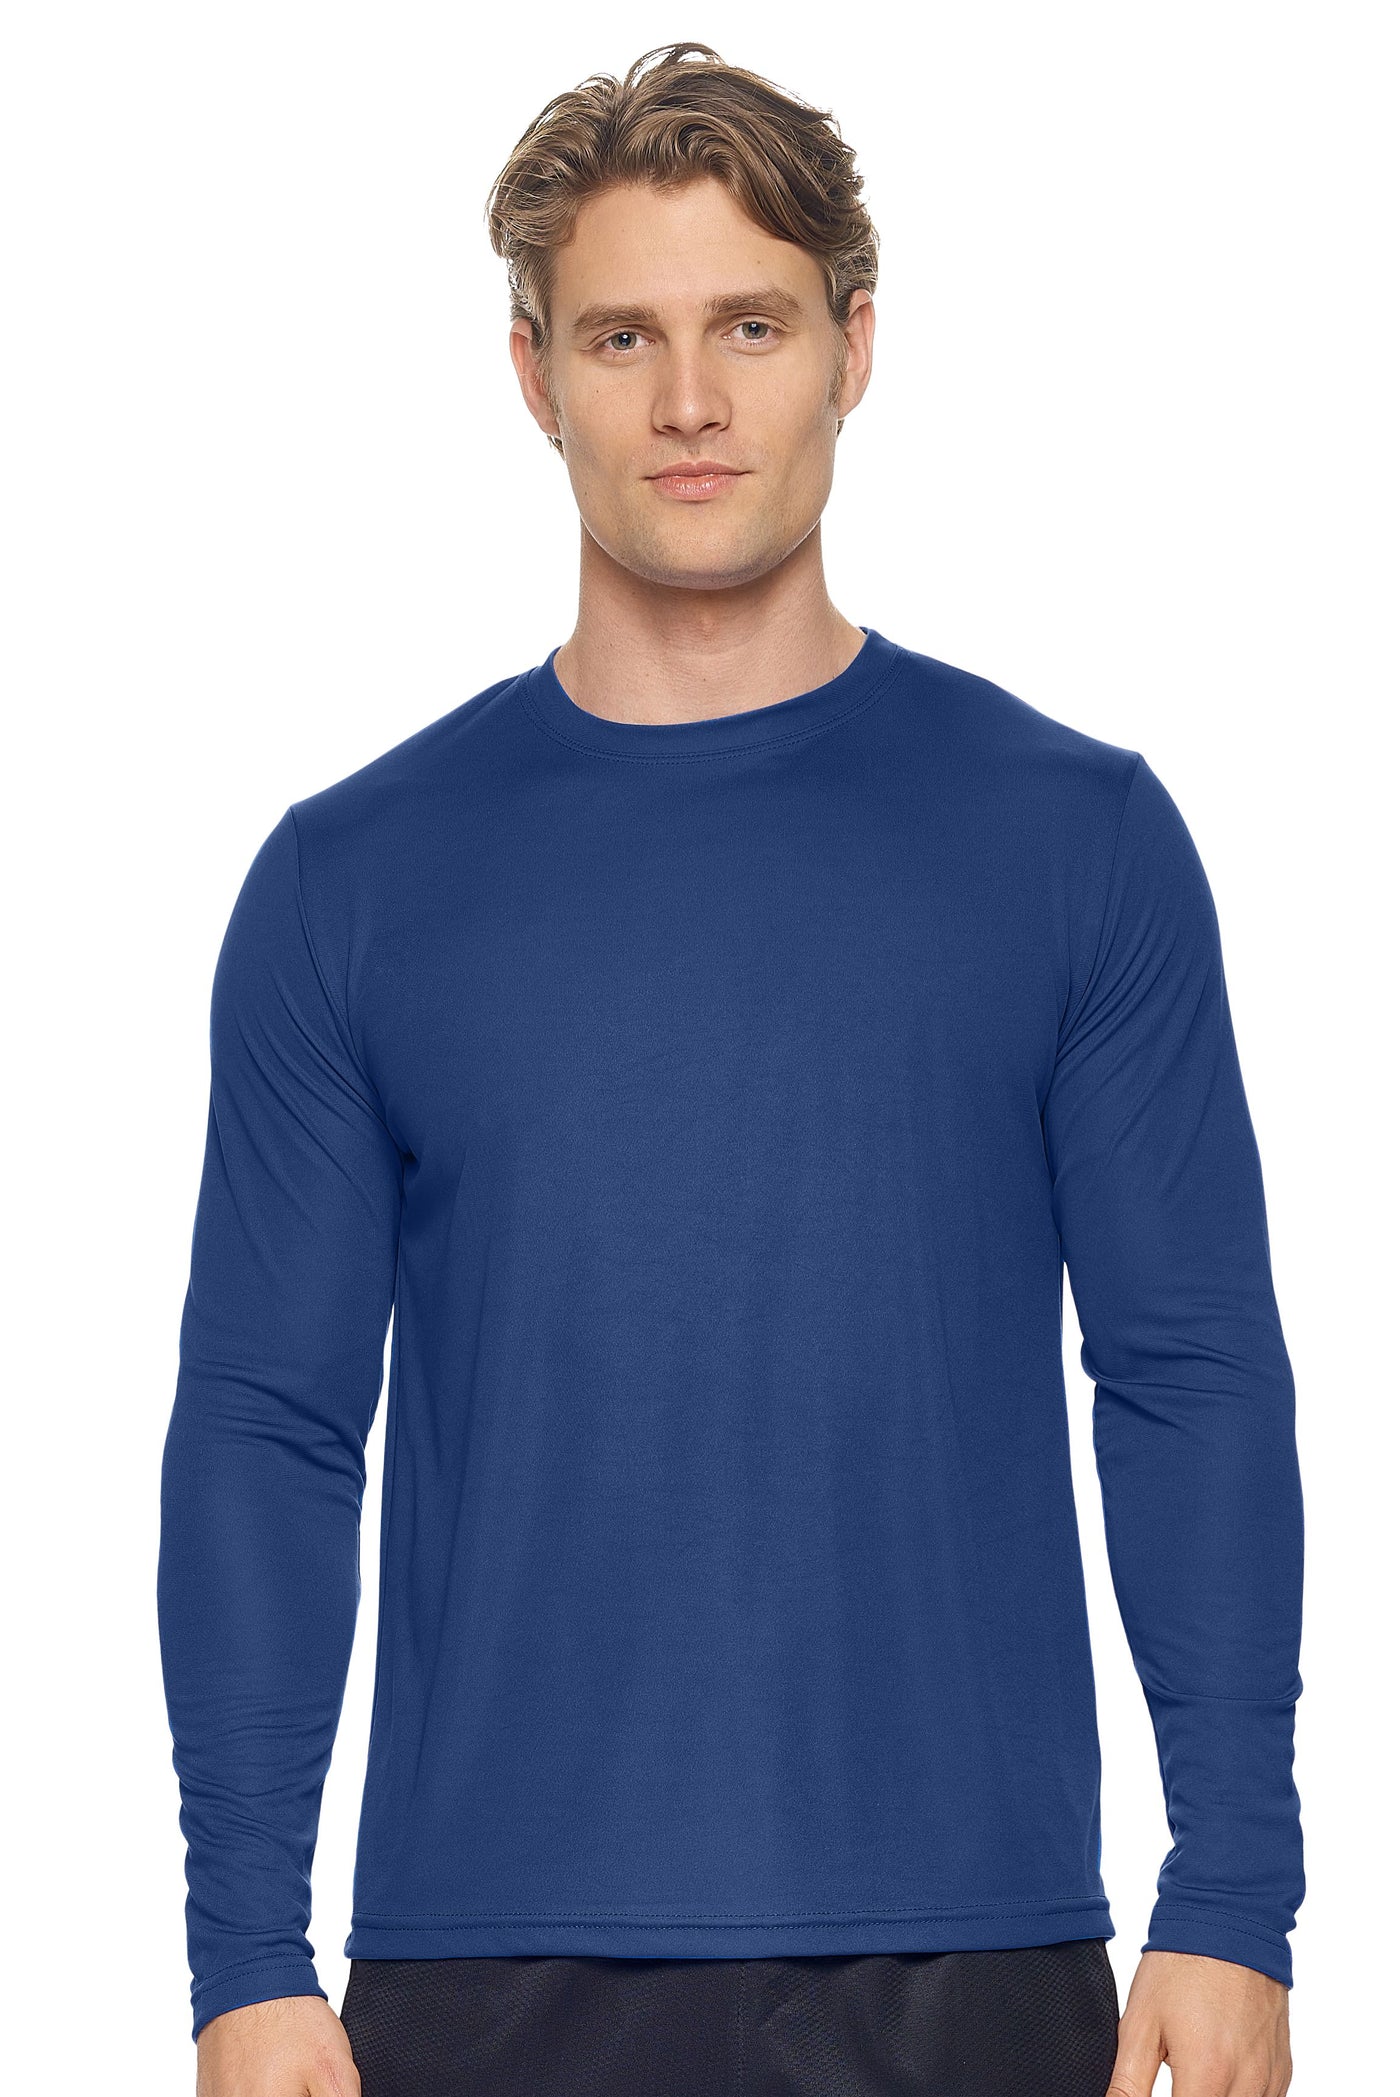 Expert Brand Retail Activewear Men's Sportswear Performance Fitness Crewneck Long Sleeve Tec Shirt Made in USA in navy#color_navy